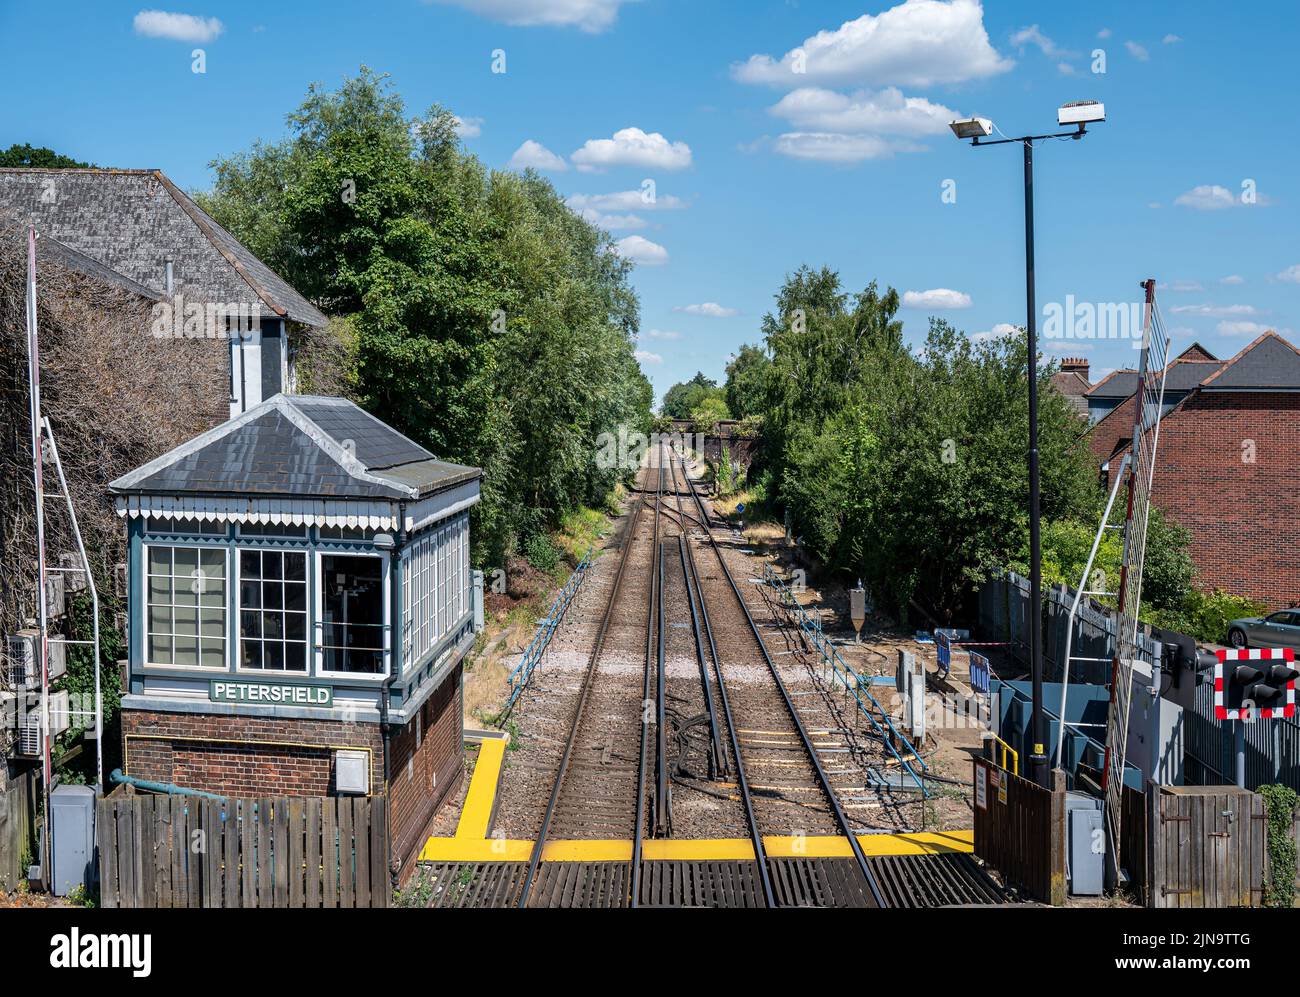 Signal box at Petersfield station along side the railway tracks and level crossing. Stock Photo